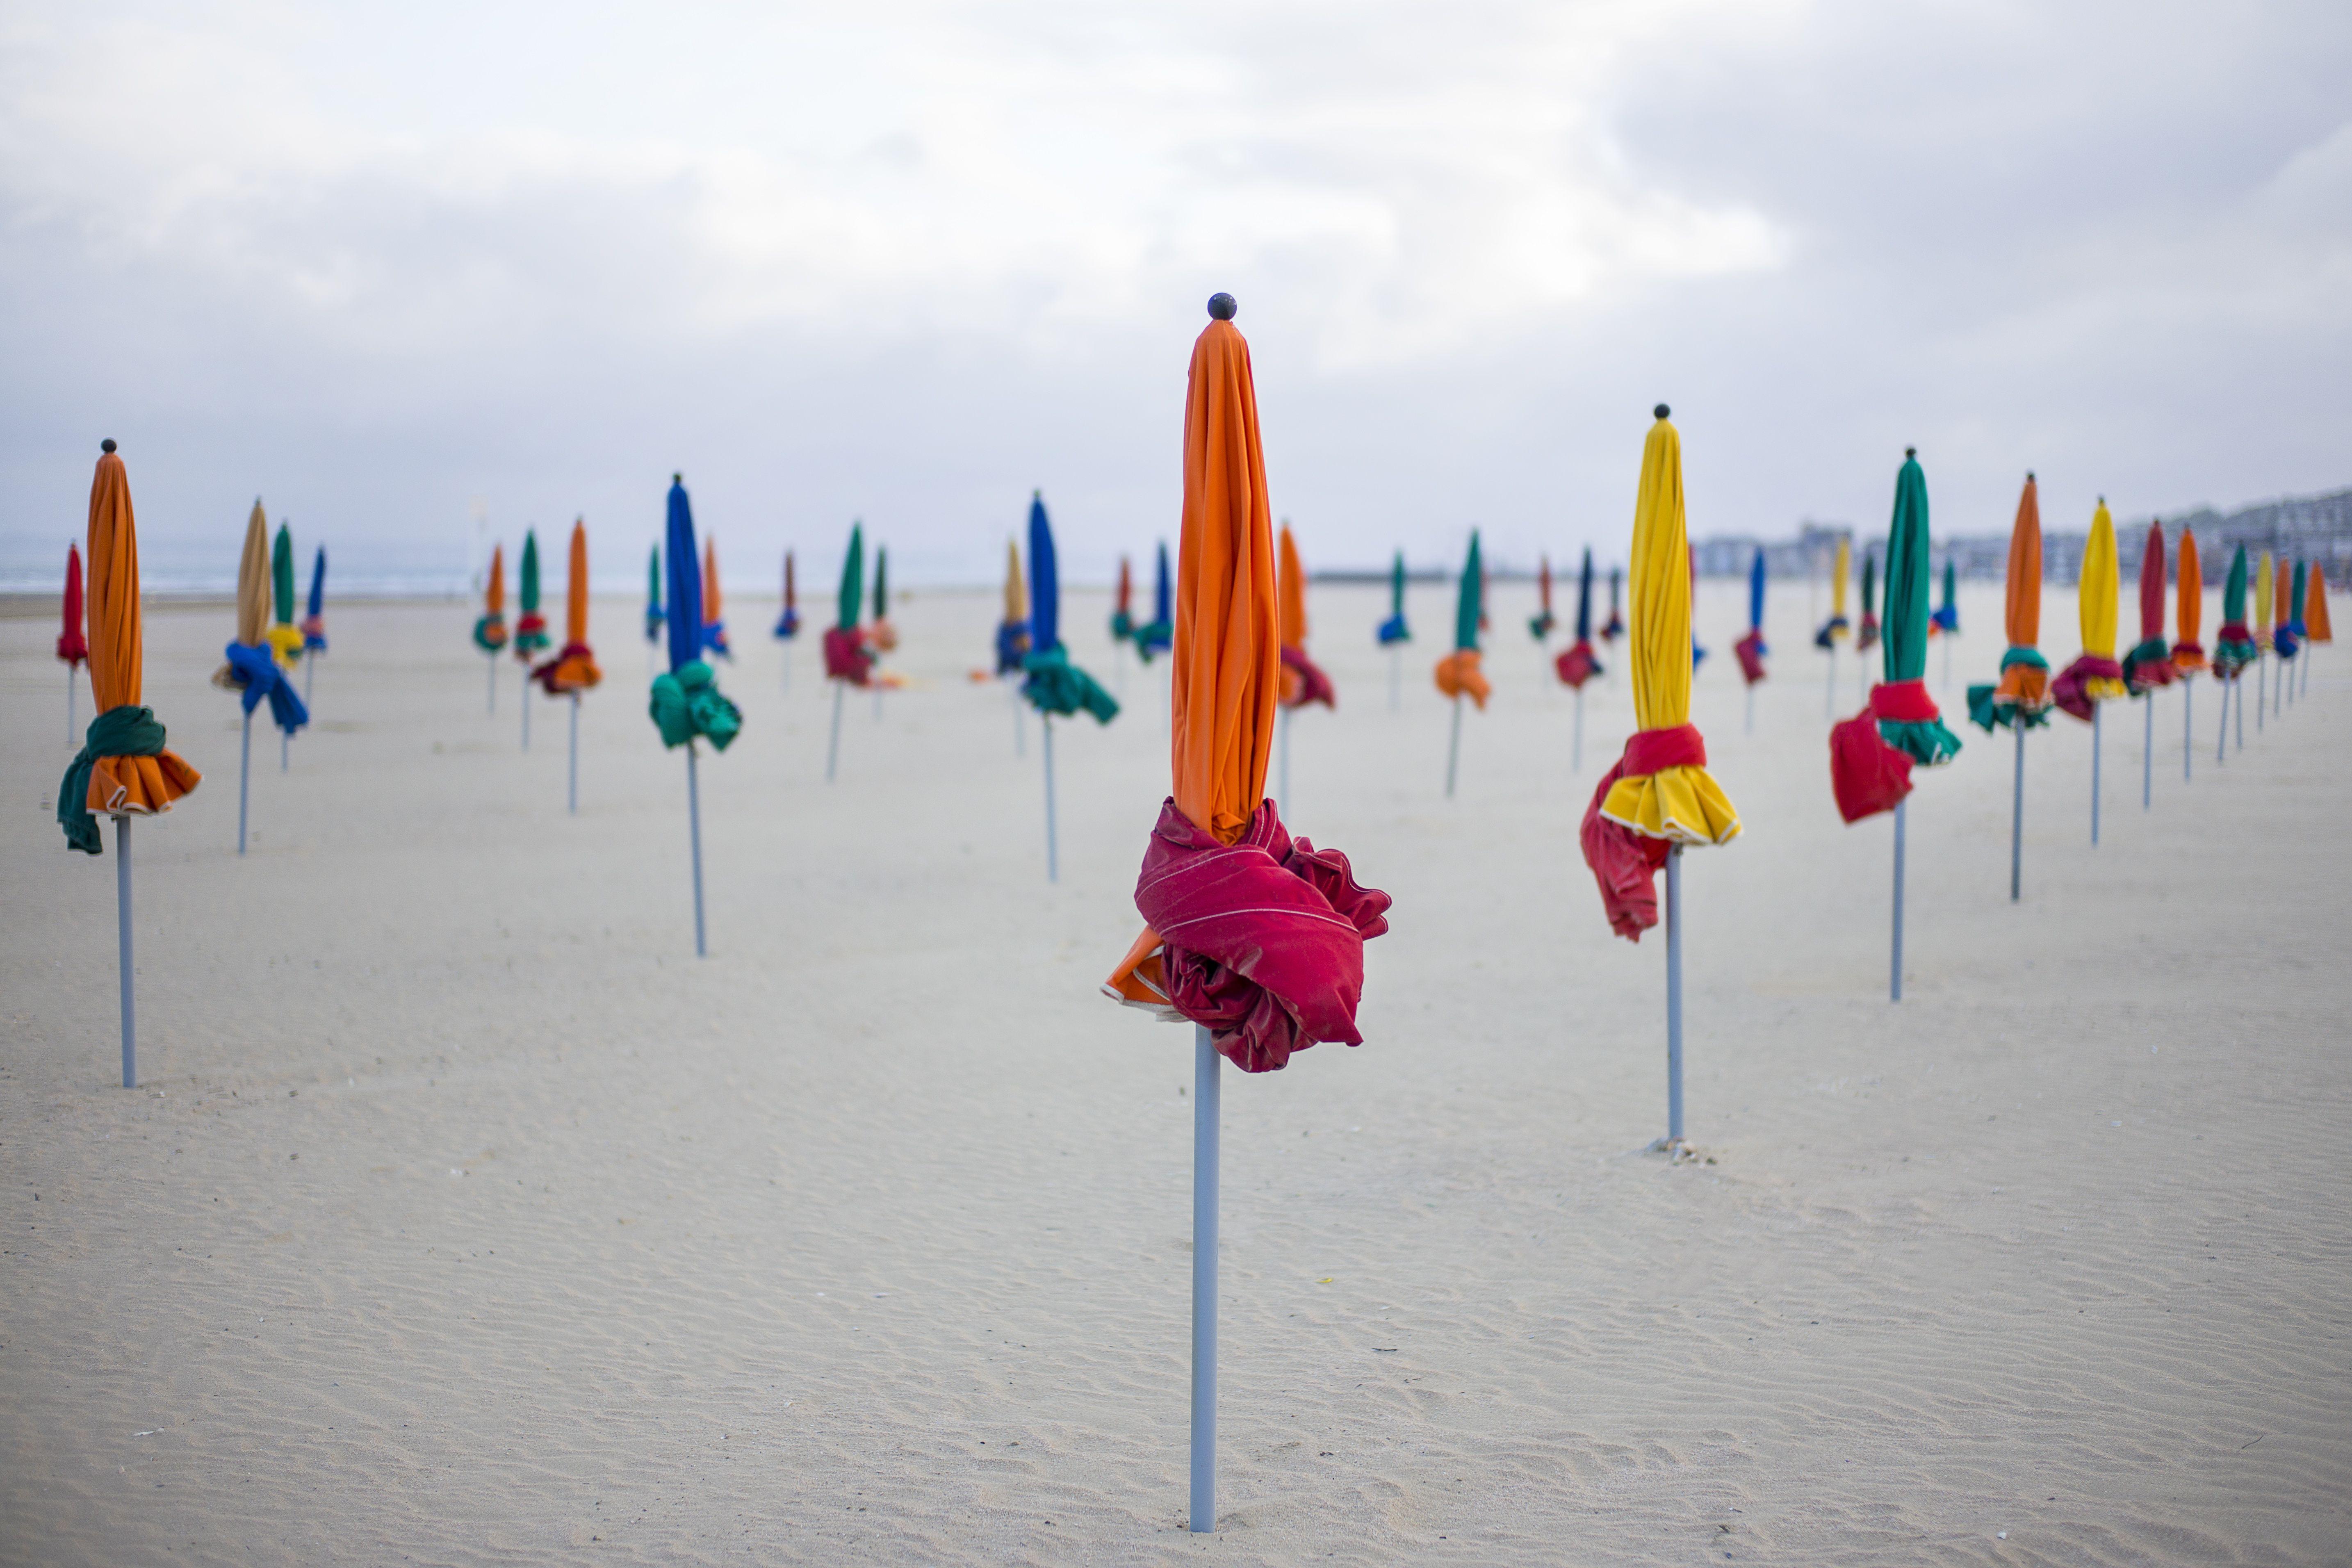 The umbrellas of Deauville, Digital on Paper - Print by Fikry Botros